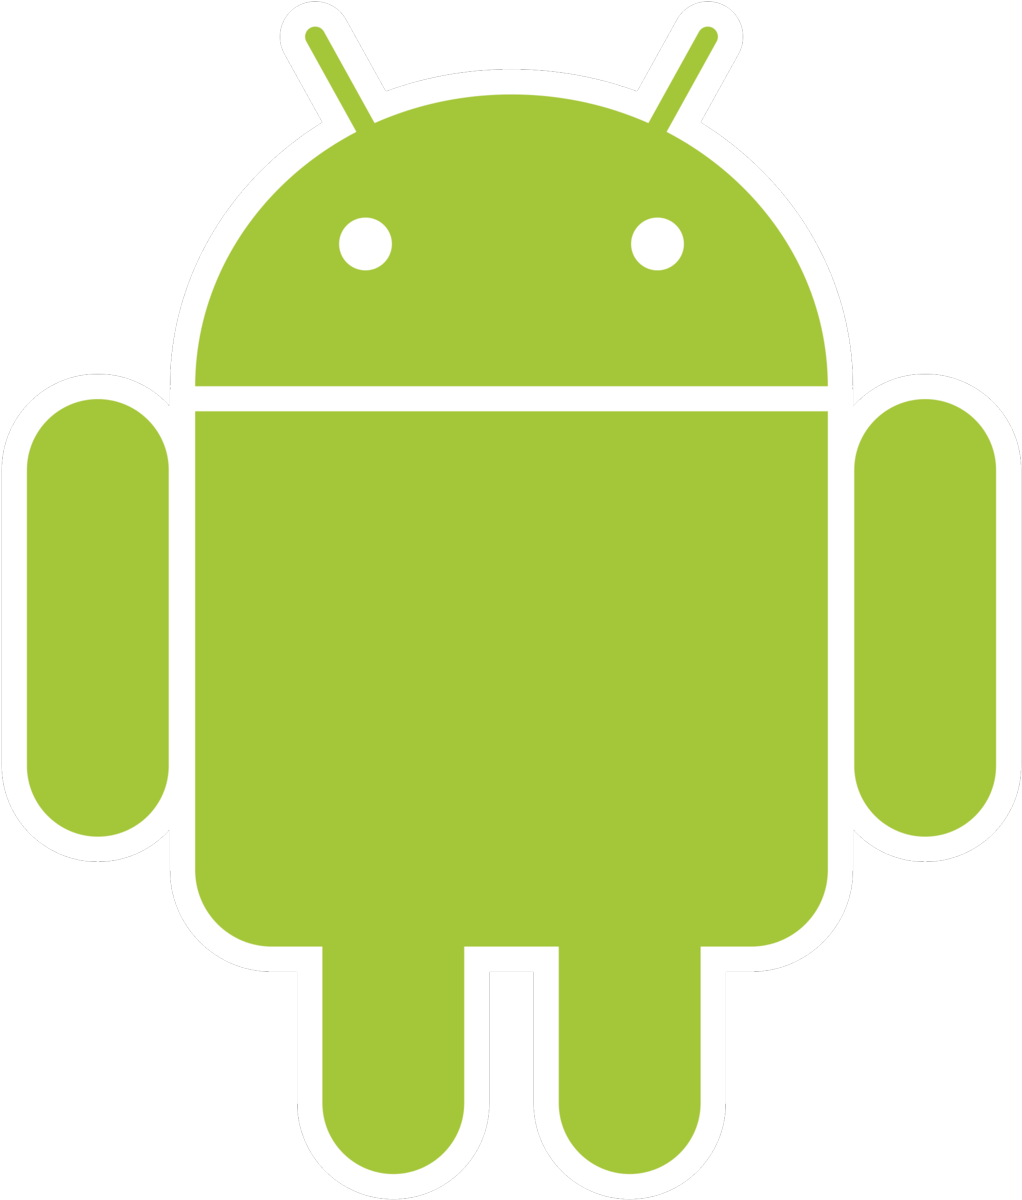 android robot svg - Don’t Put Too Much Stock in Android’s Dominant Market Share